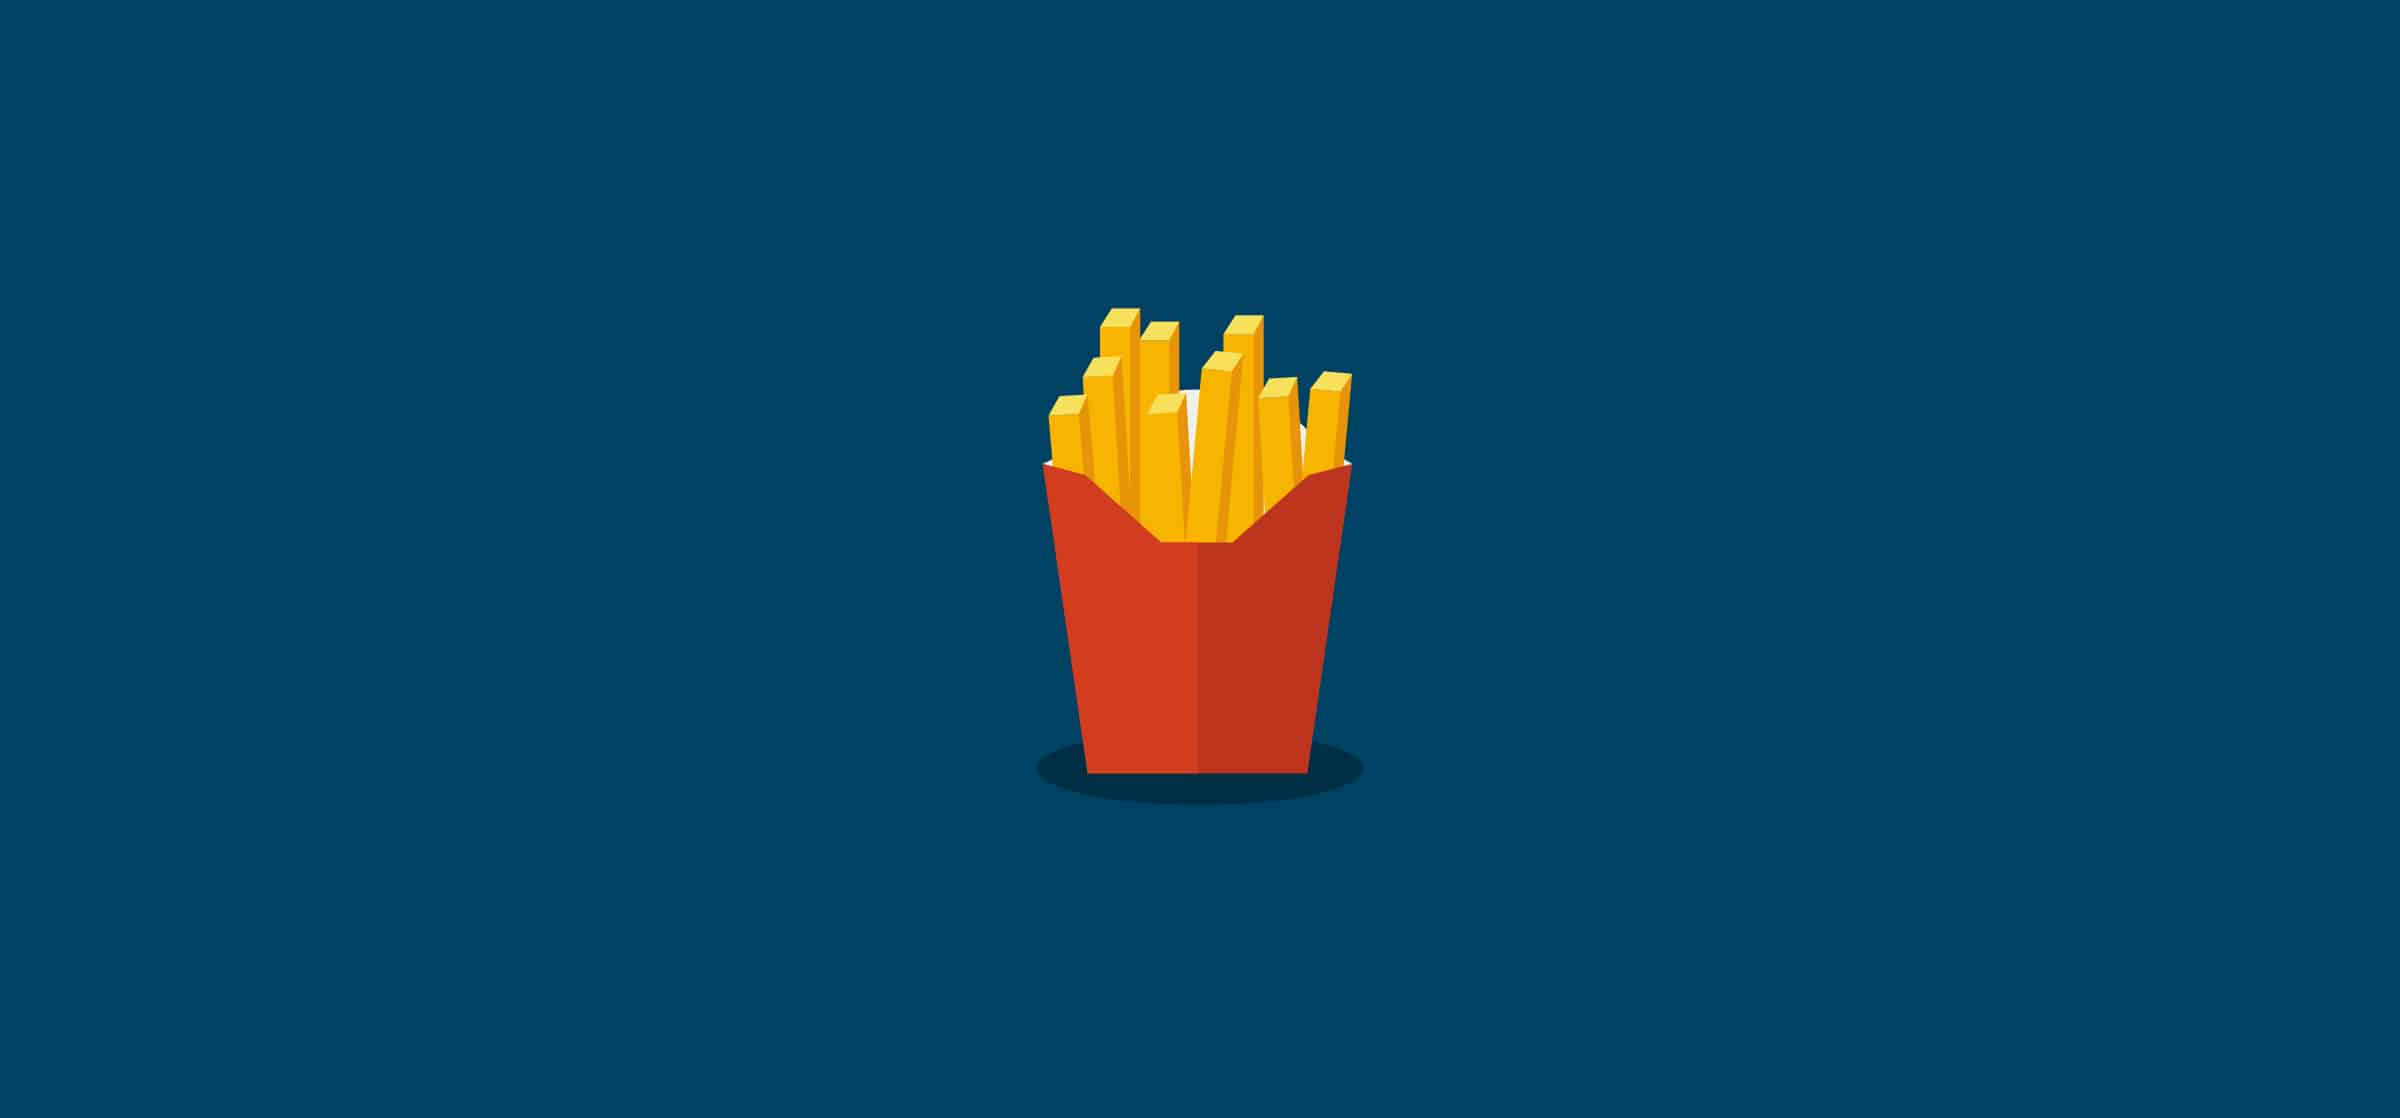 French fries, representing the Excel add-ins blog post